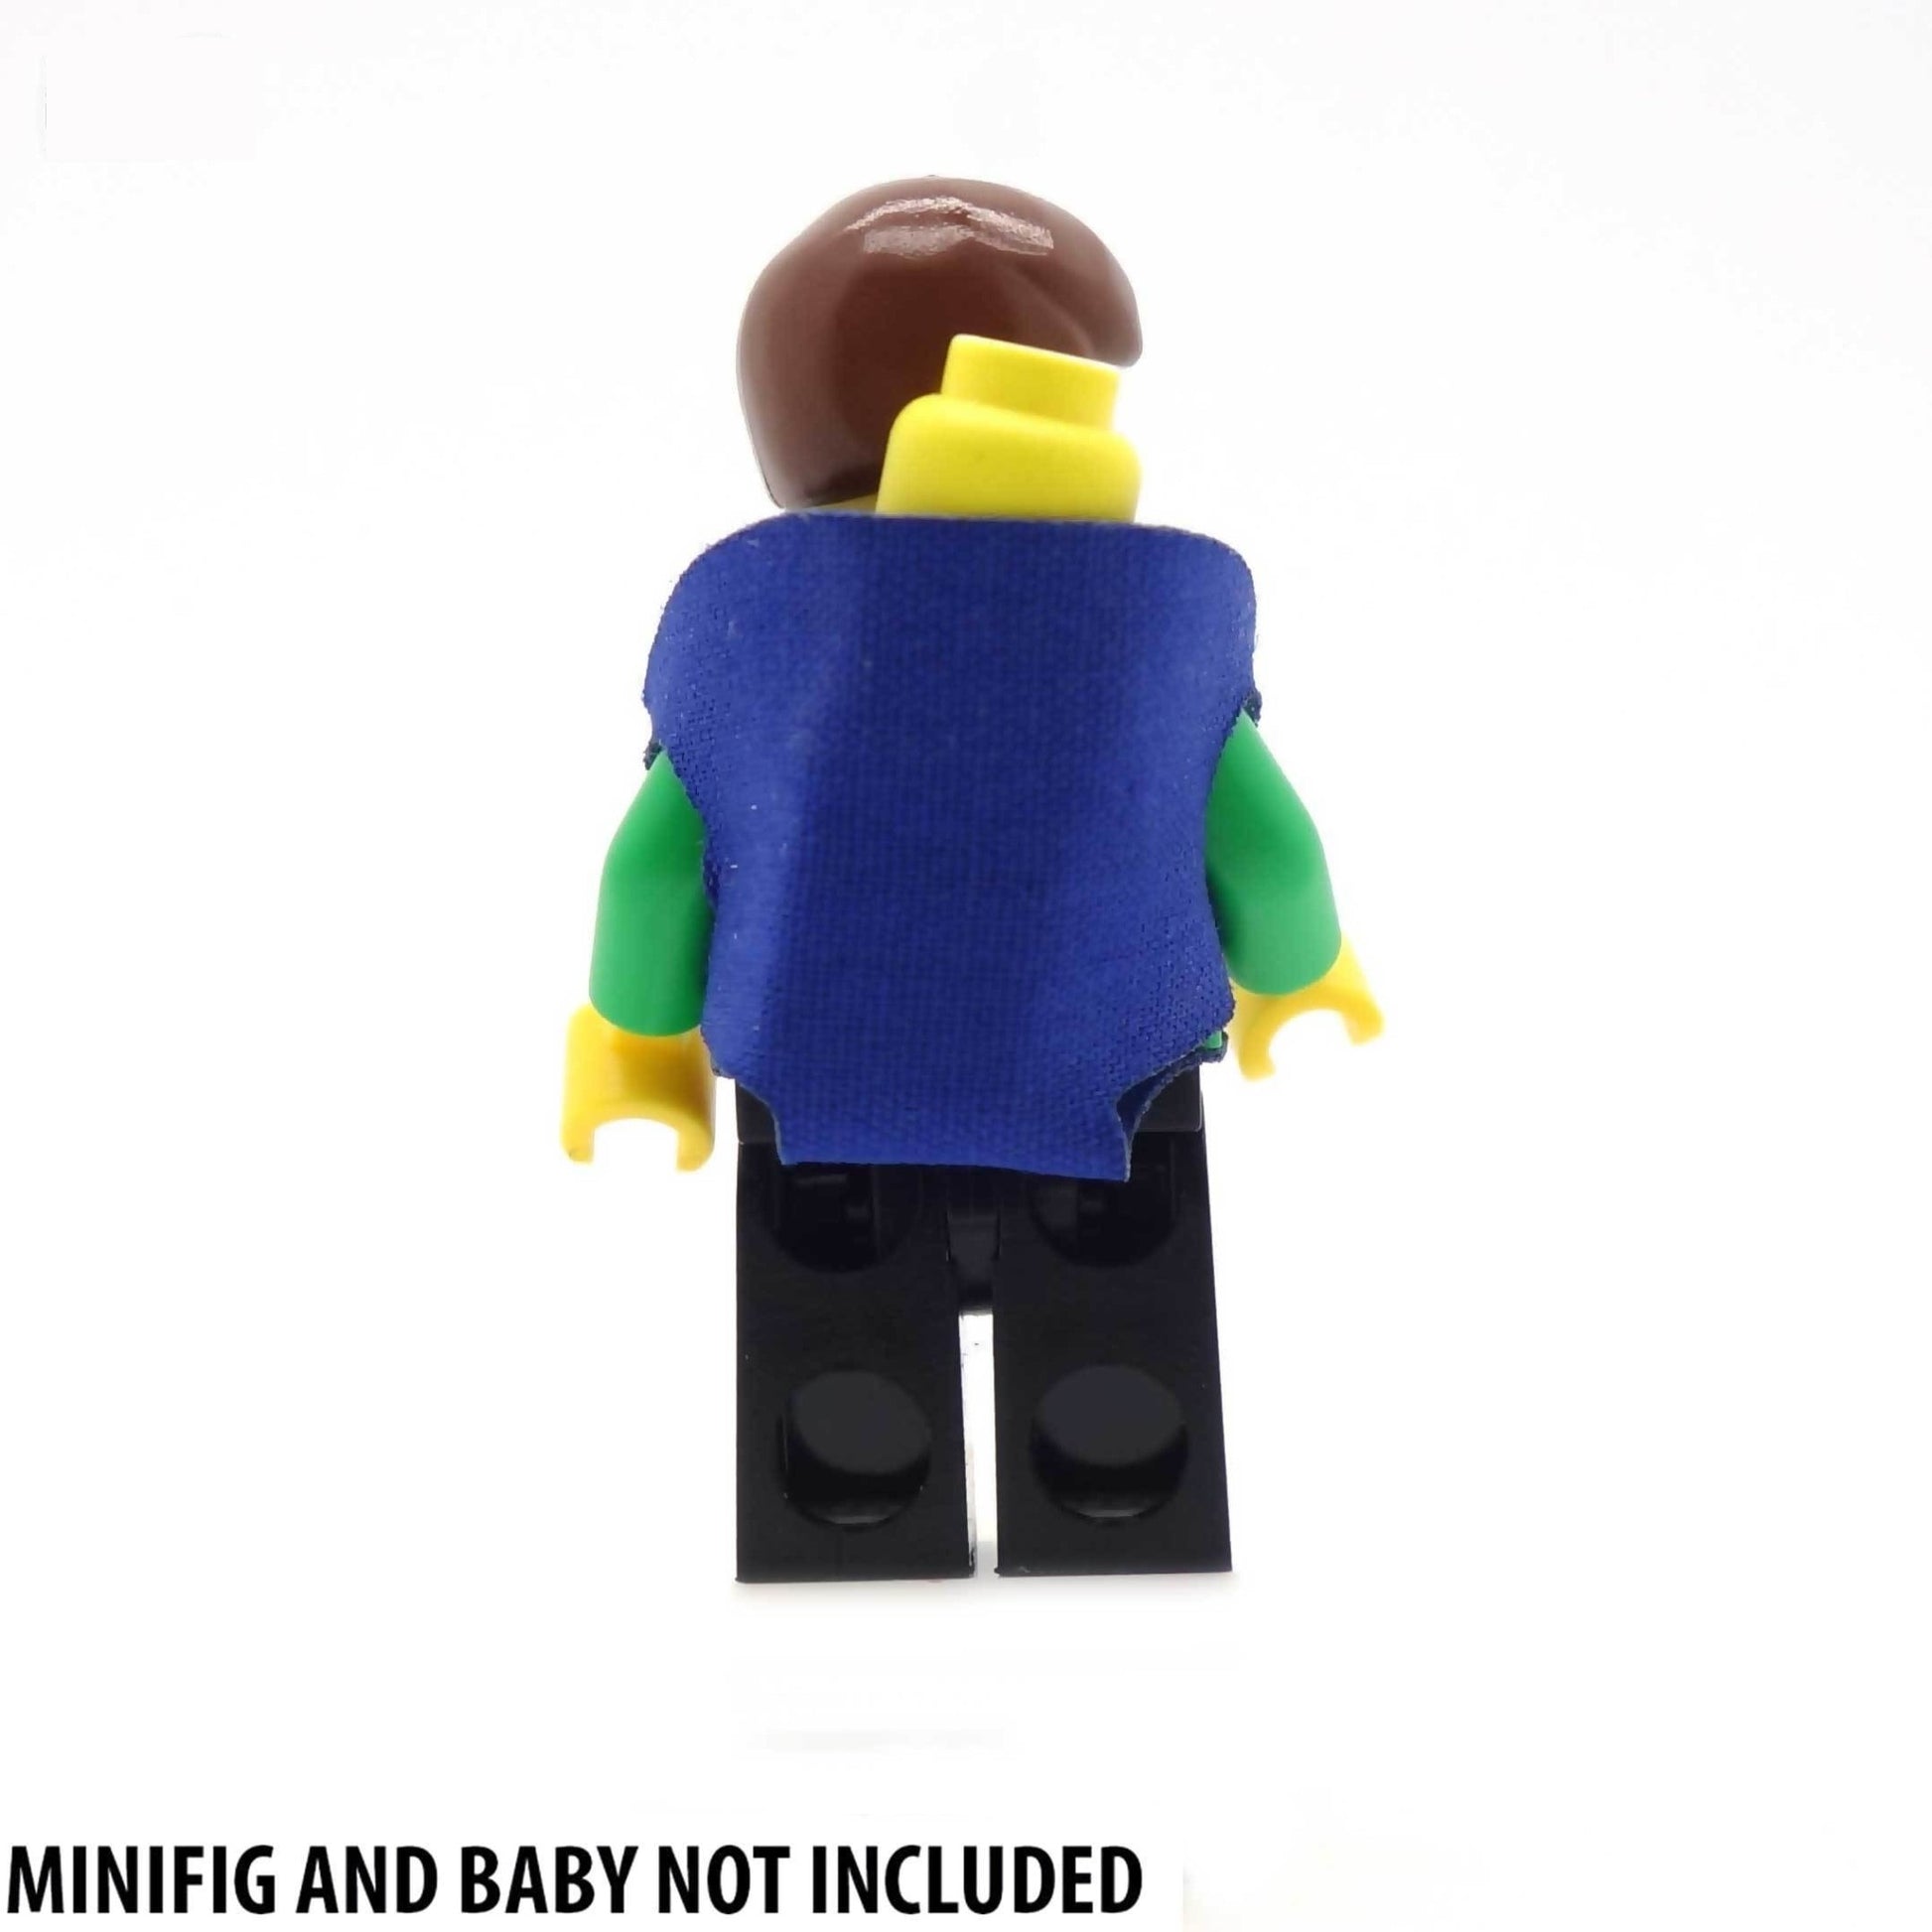 LEGO Minifigure Wearing Sling with Baby In